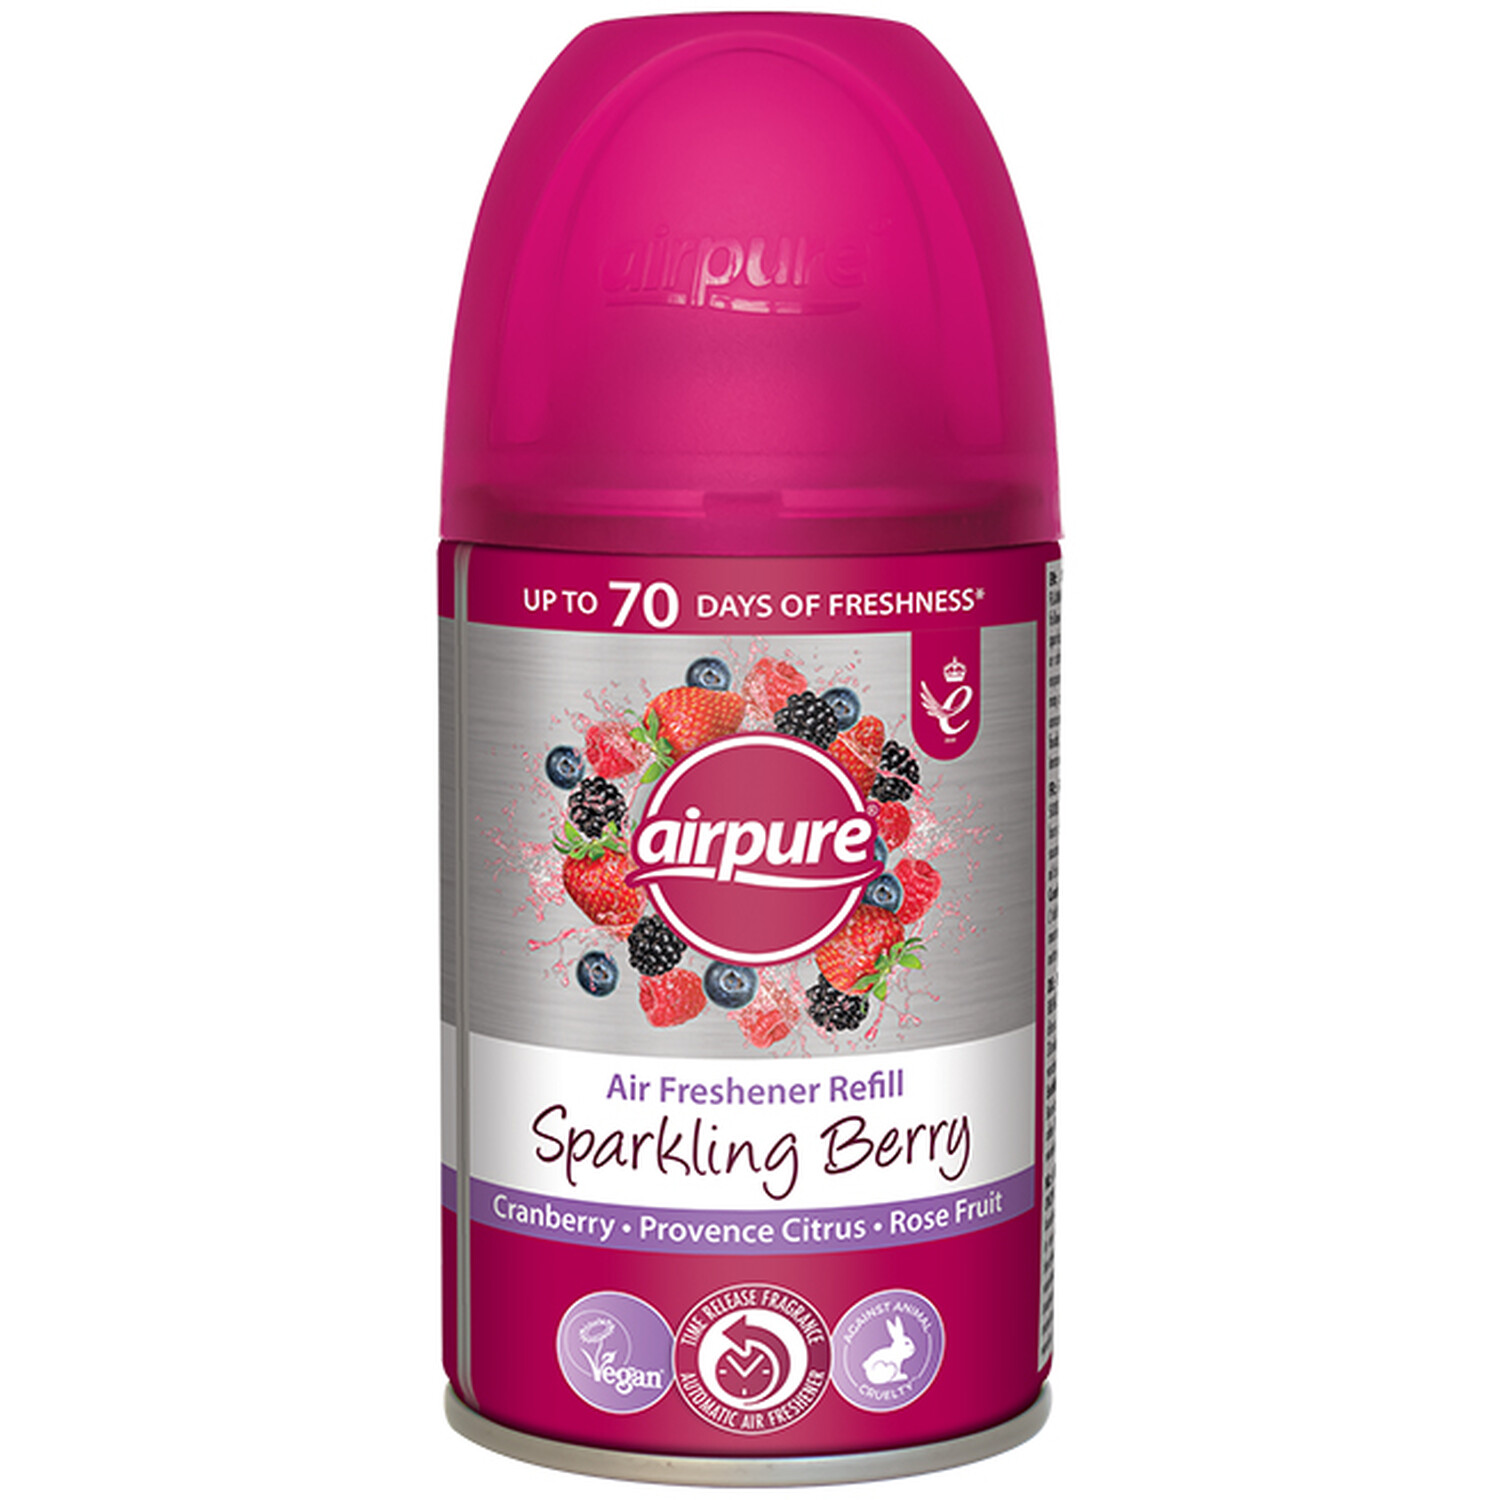 Airpure Air Freshener Refill Tin - Sparkling Berry Image